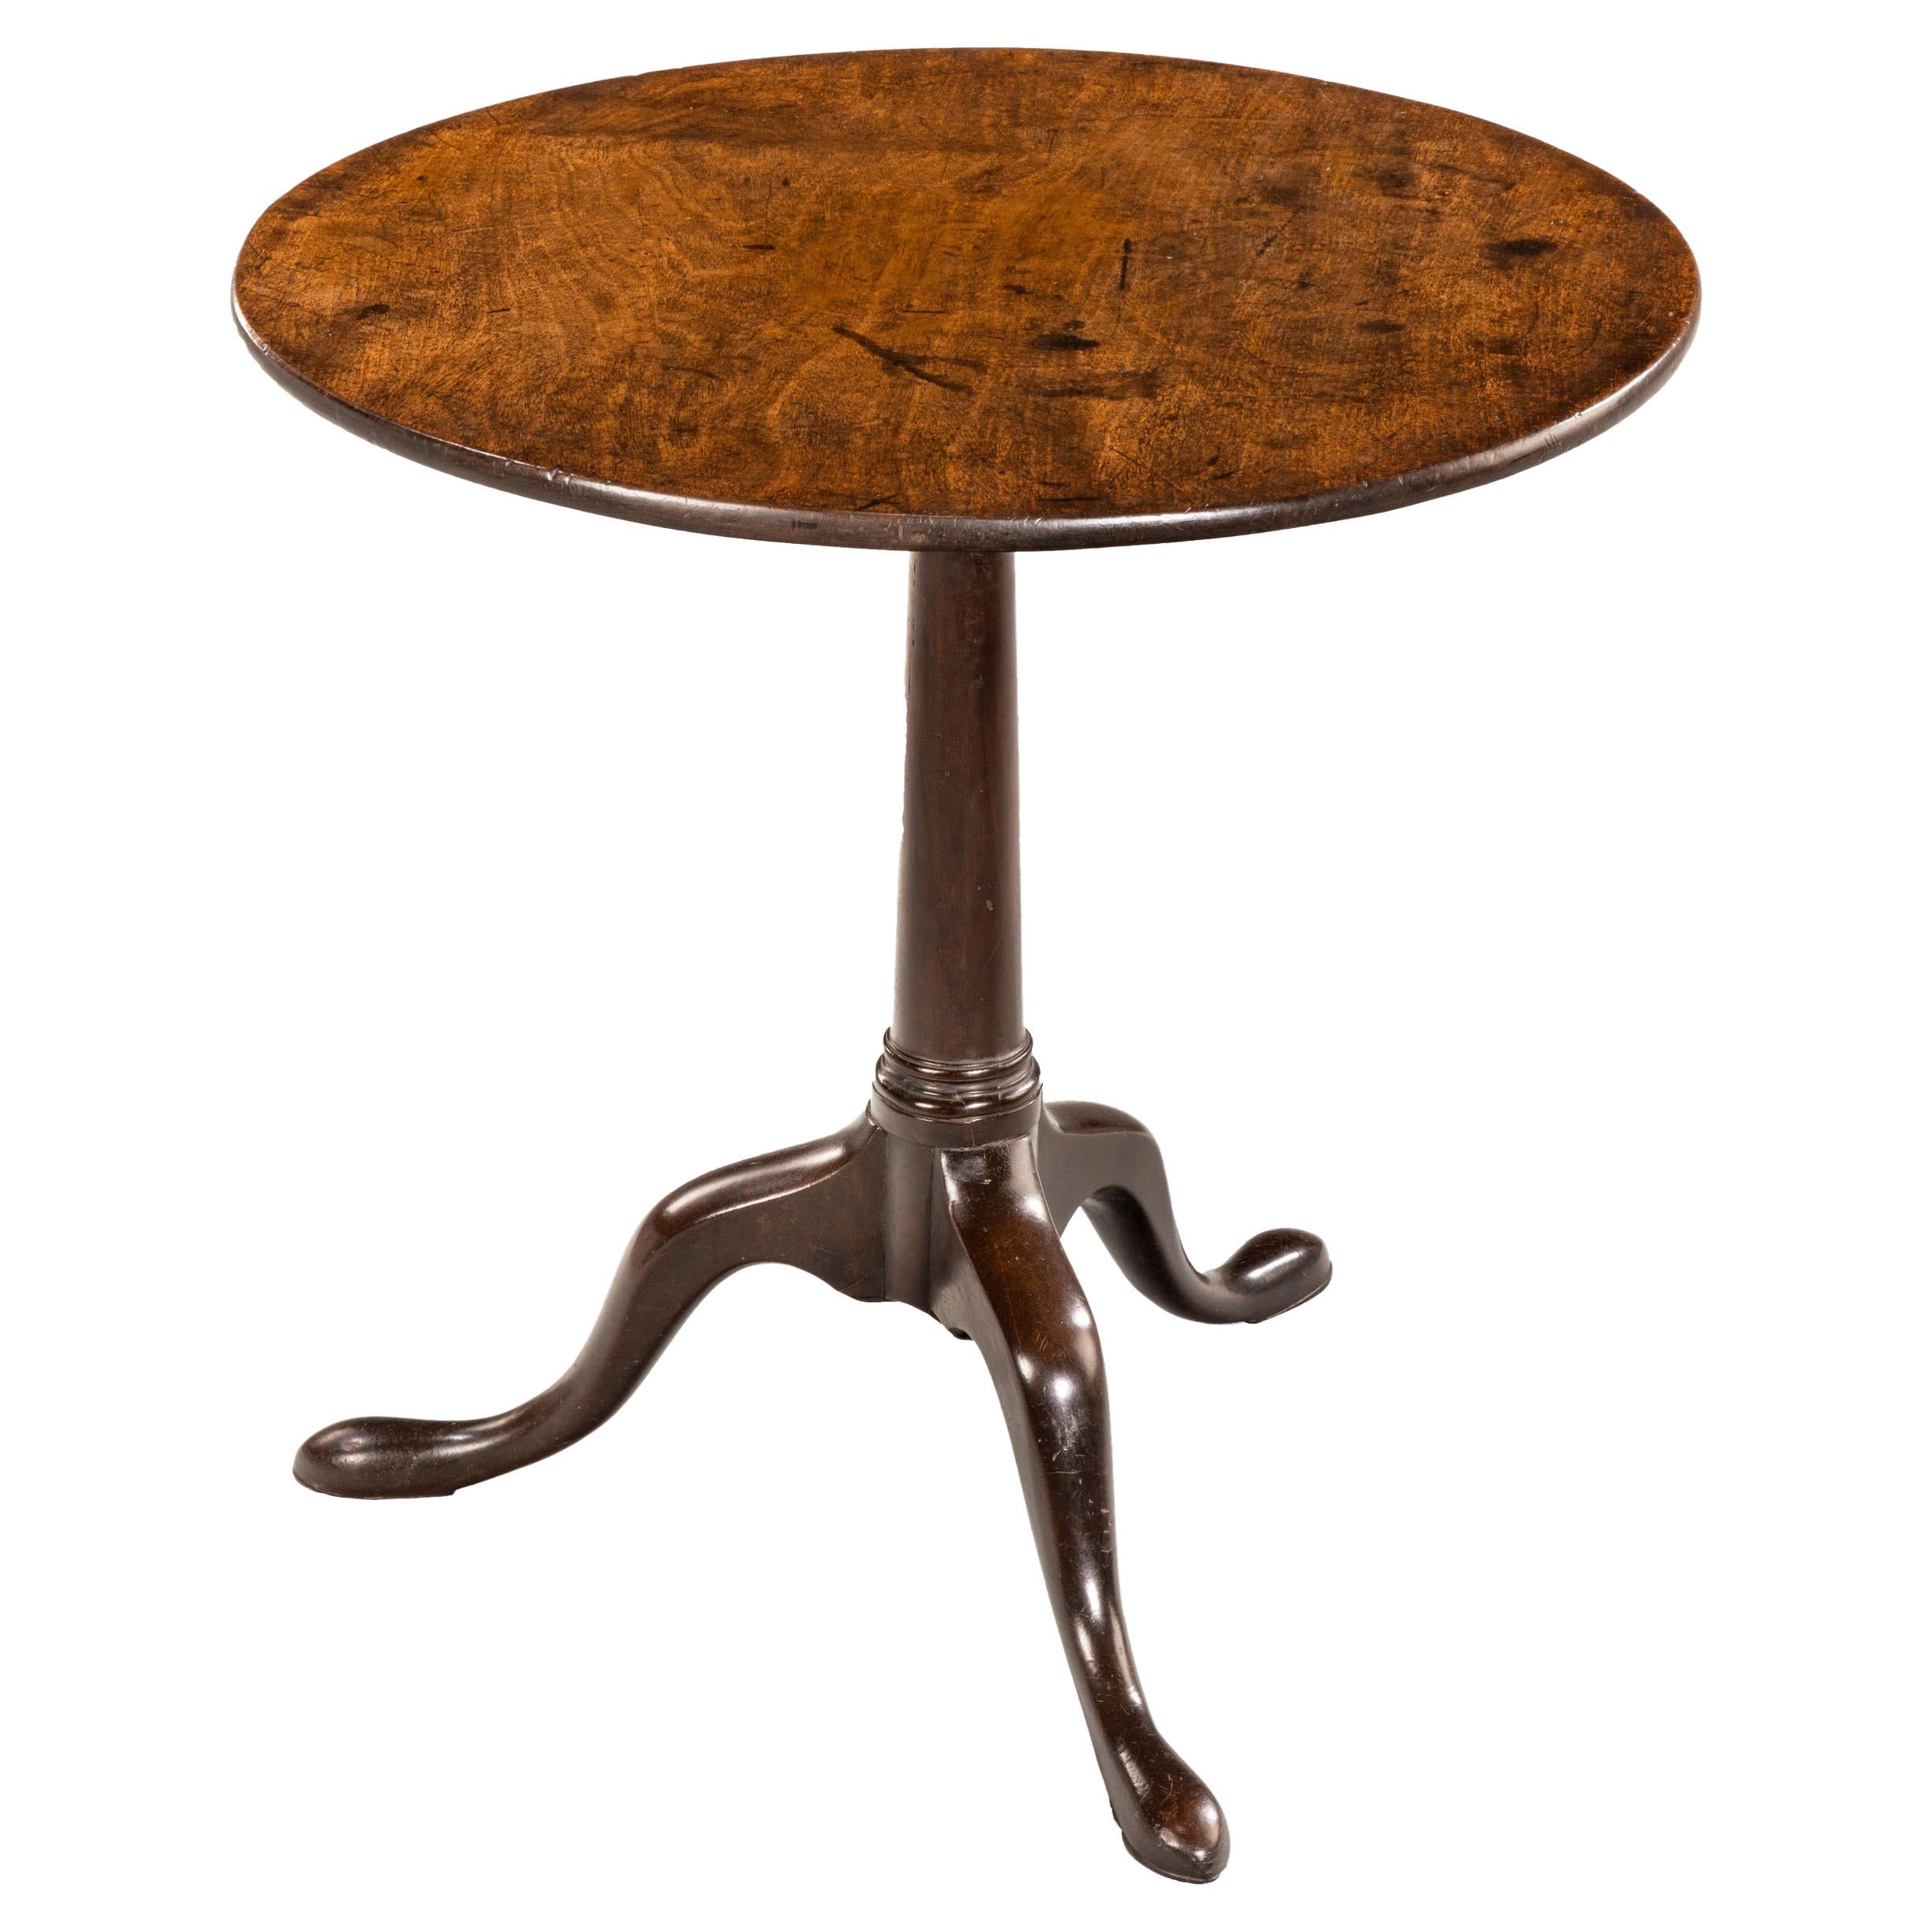 Particularly Good George III Period Mahogany Tilt Table